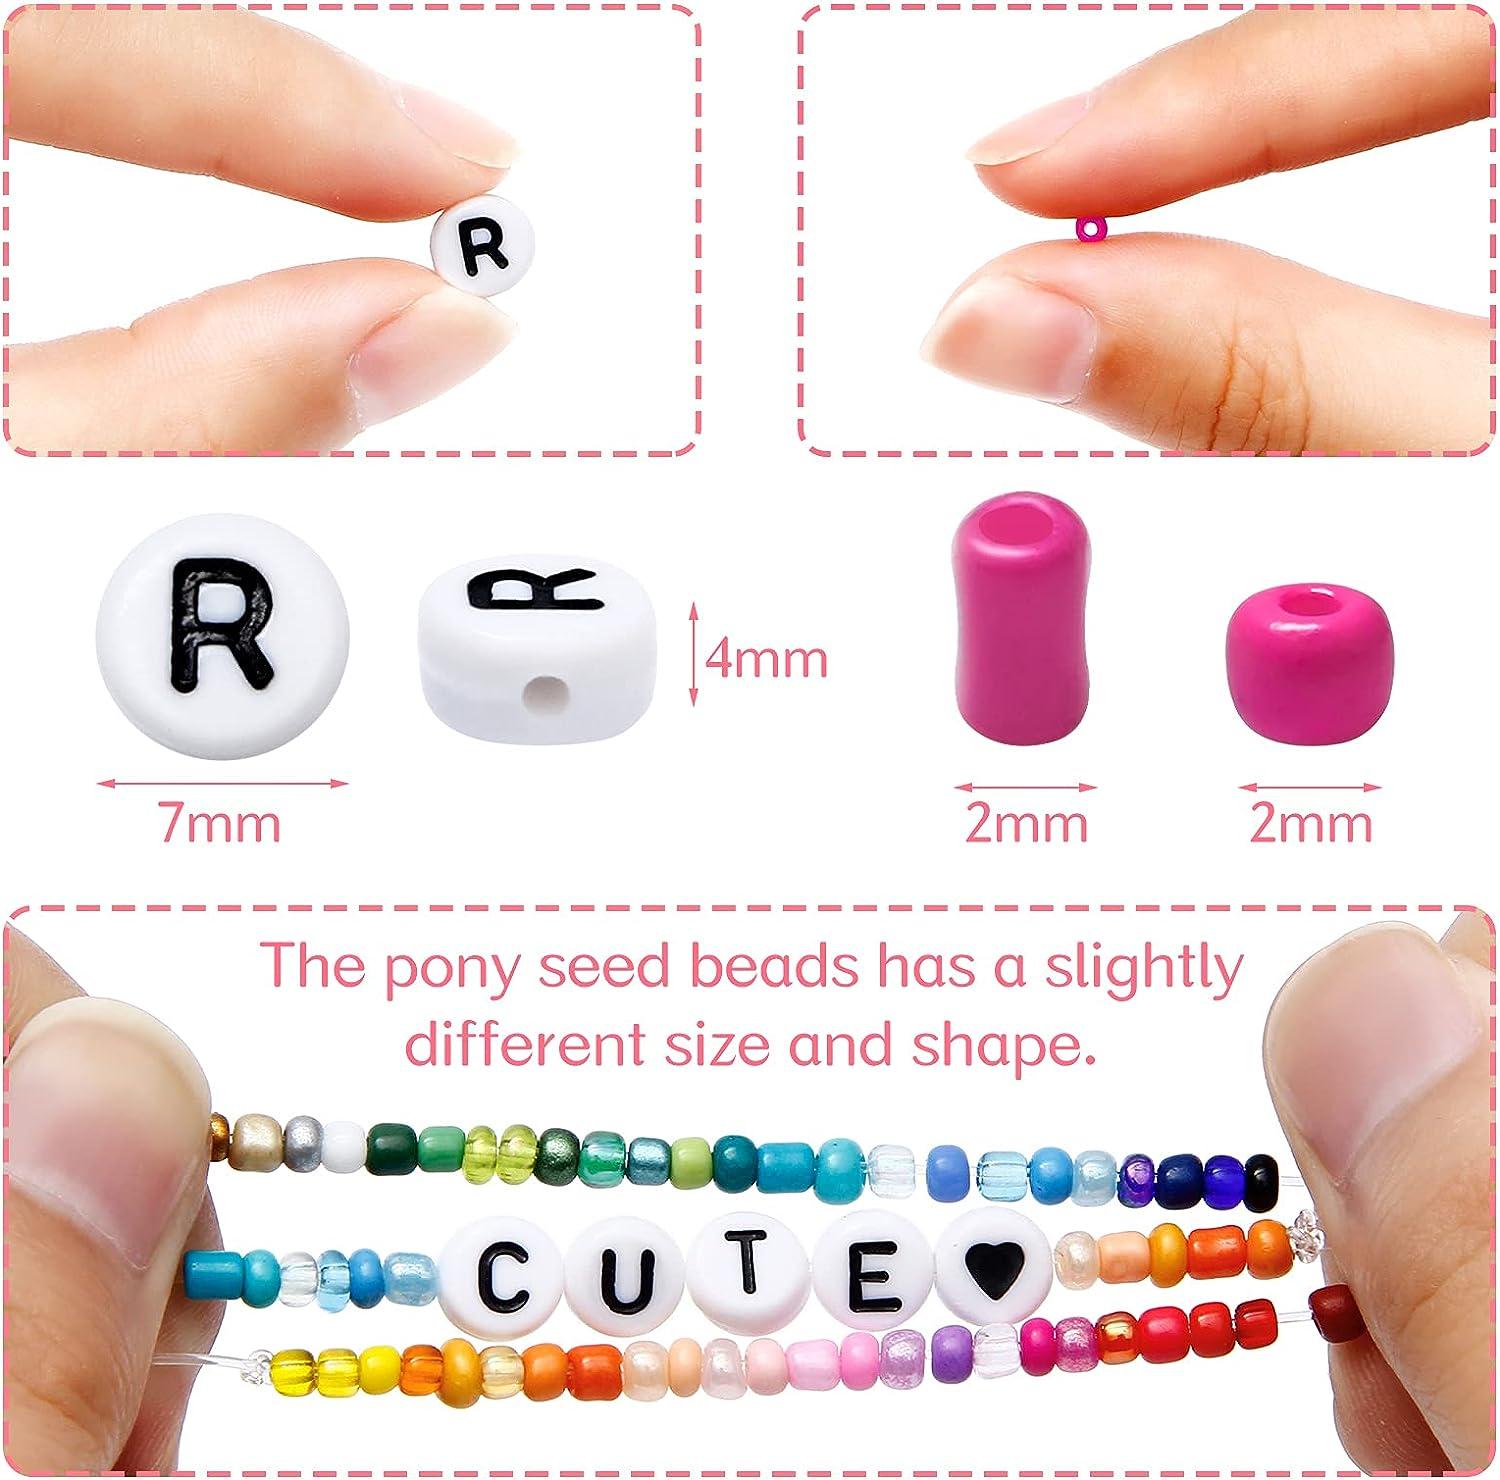 34560pcs Glass Seed Beads 2mm Bead Bracelet Making Kit Small Craft Beads  for DIY Bracelet Necklaces Jewelry Making Supplies with 300pcs Alphabet  Letter Beads and Accessories Material